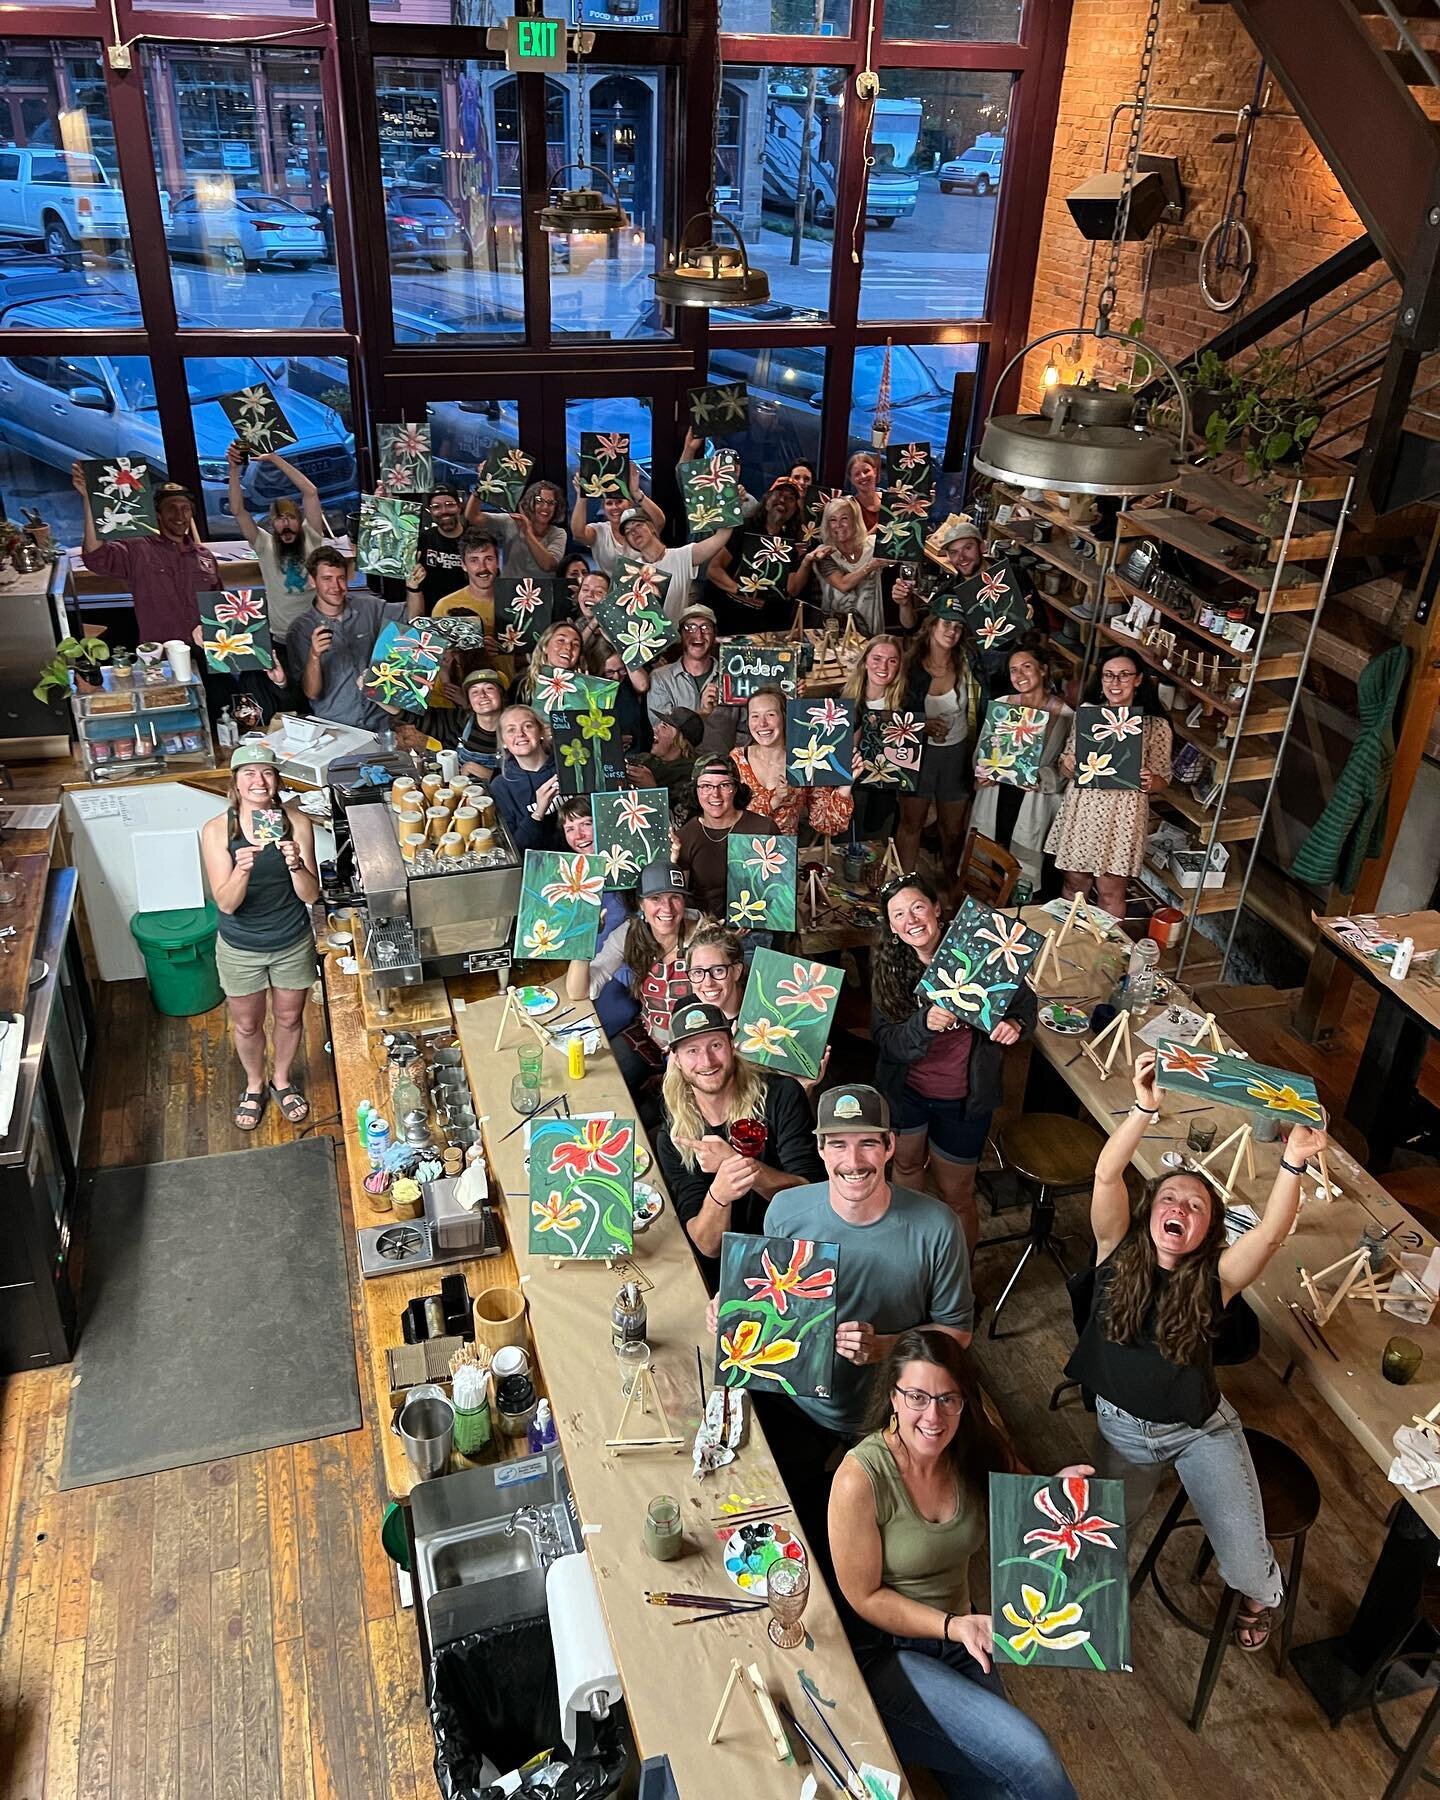 Well that was a hootin good time! Thank you so much to everyone who came to Wine &amp; Paint Night last night. And of course thank you @anne.the.man for agreeing to instruct - you&rsquo;re incredible 🤍

See you all next month 🖌🎨🌺